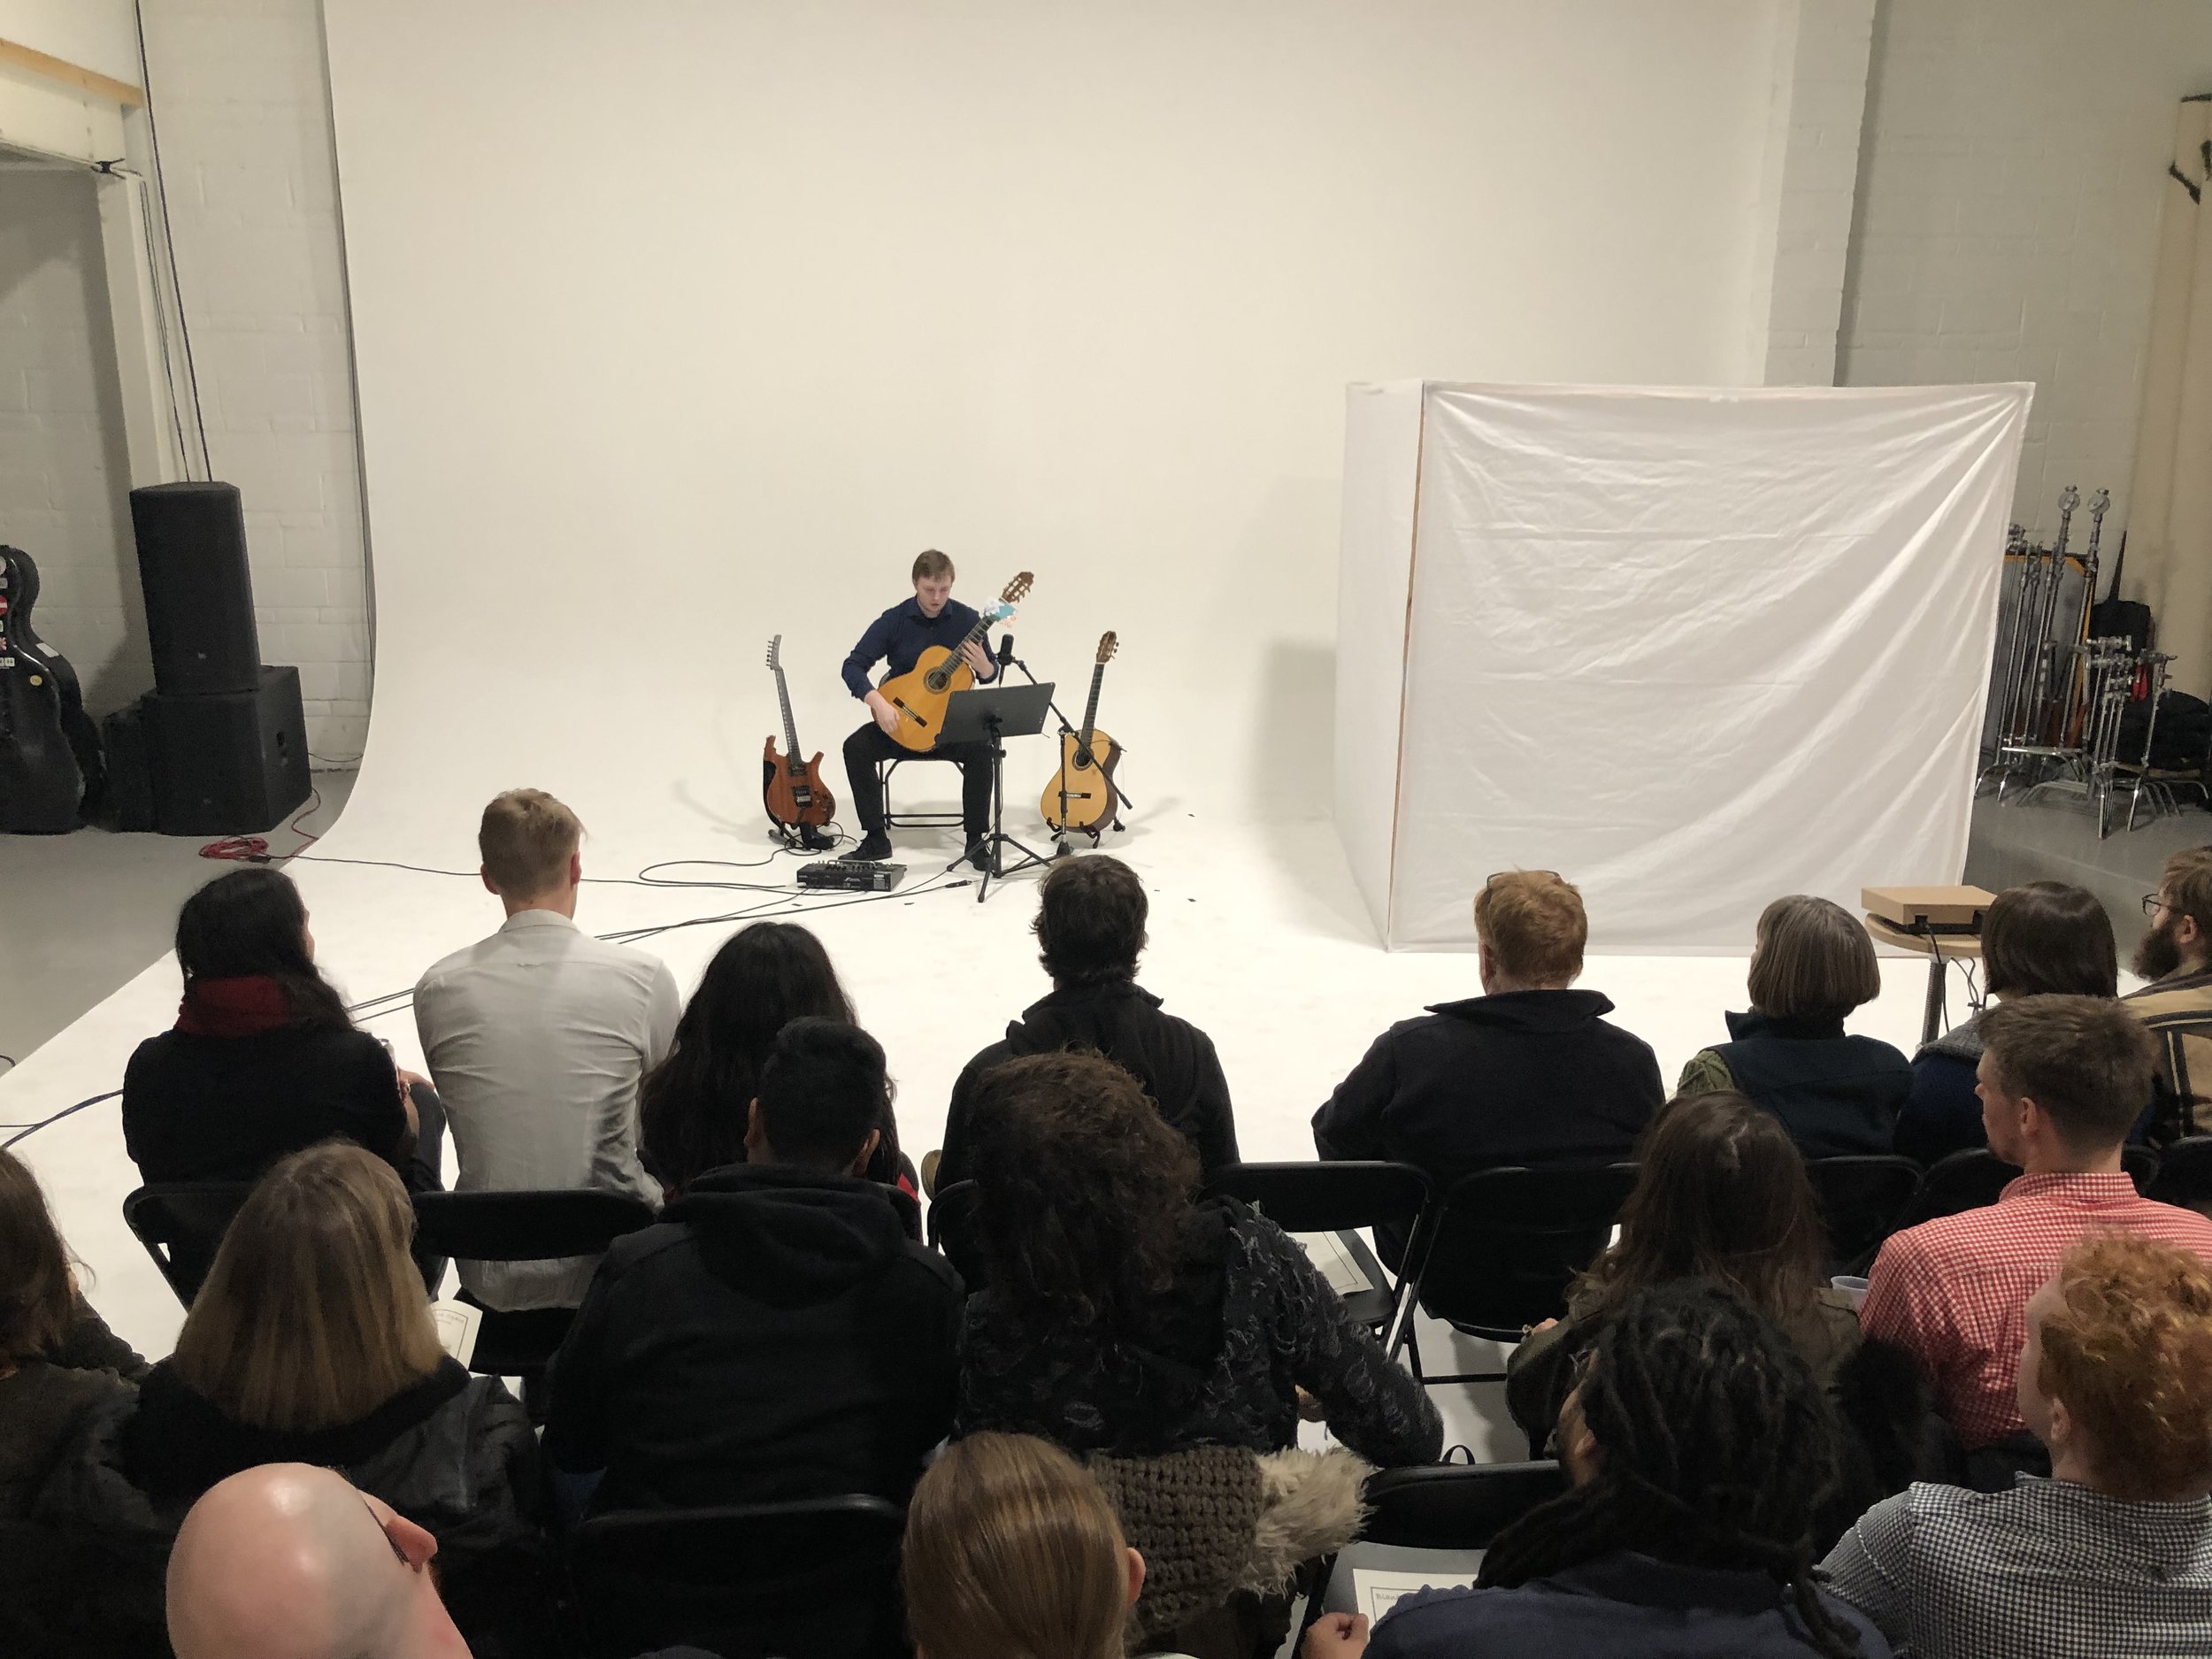  Performing at Futurespace in Brooklyn, hosted by Blank Canvas 